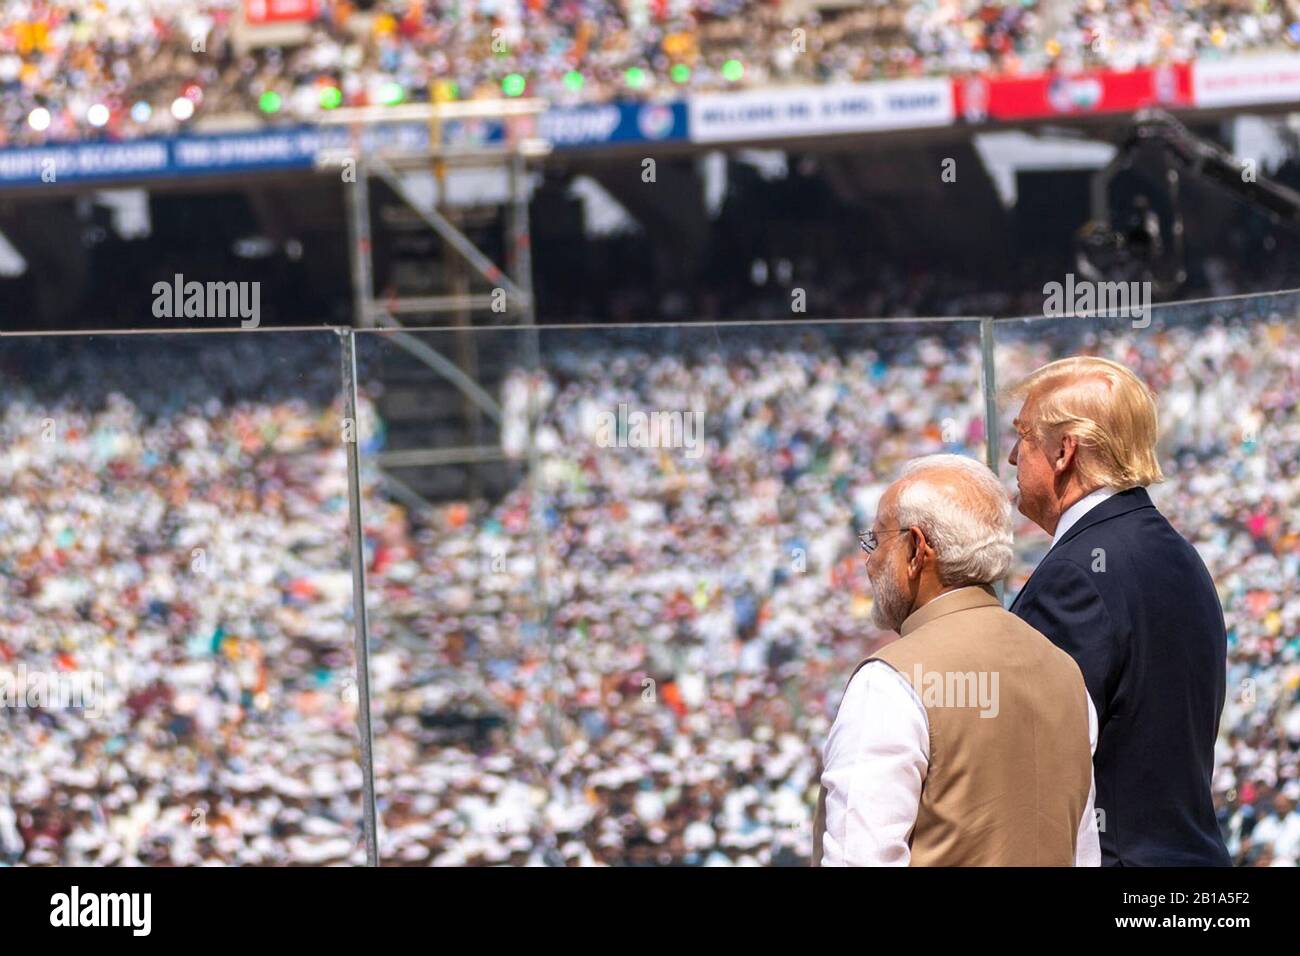 Ahmedabad, India. 24th Feb, 2020. U.S. President Donald Trump and Indian Prime Minister Narendra Modi stand during the national anthems during the Namaste Trump Rally at the Motera Stadium February 24, 2020 in Ahmedabad, Gujarat, India. Credit: Shealah Craighead/White House Photo/Alamy Live News Stock Photo